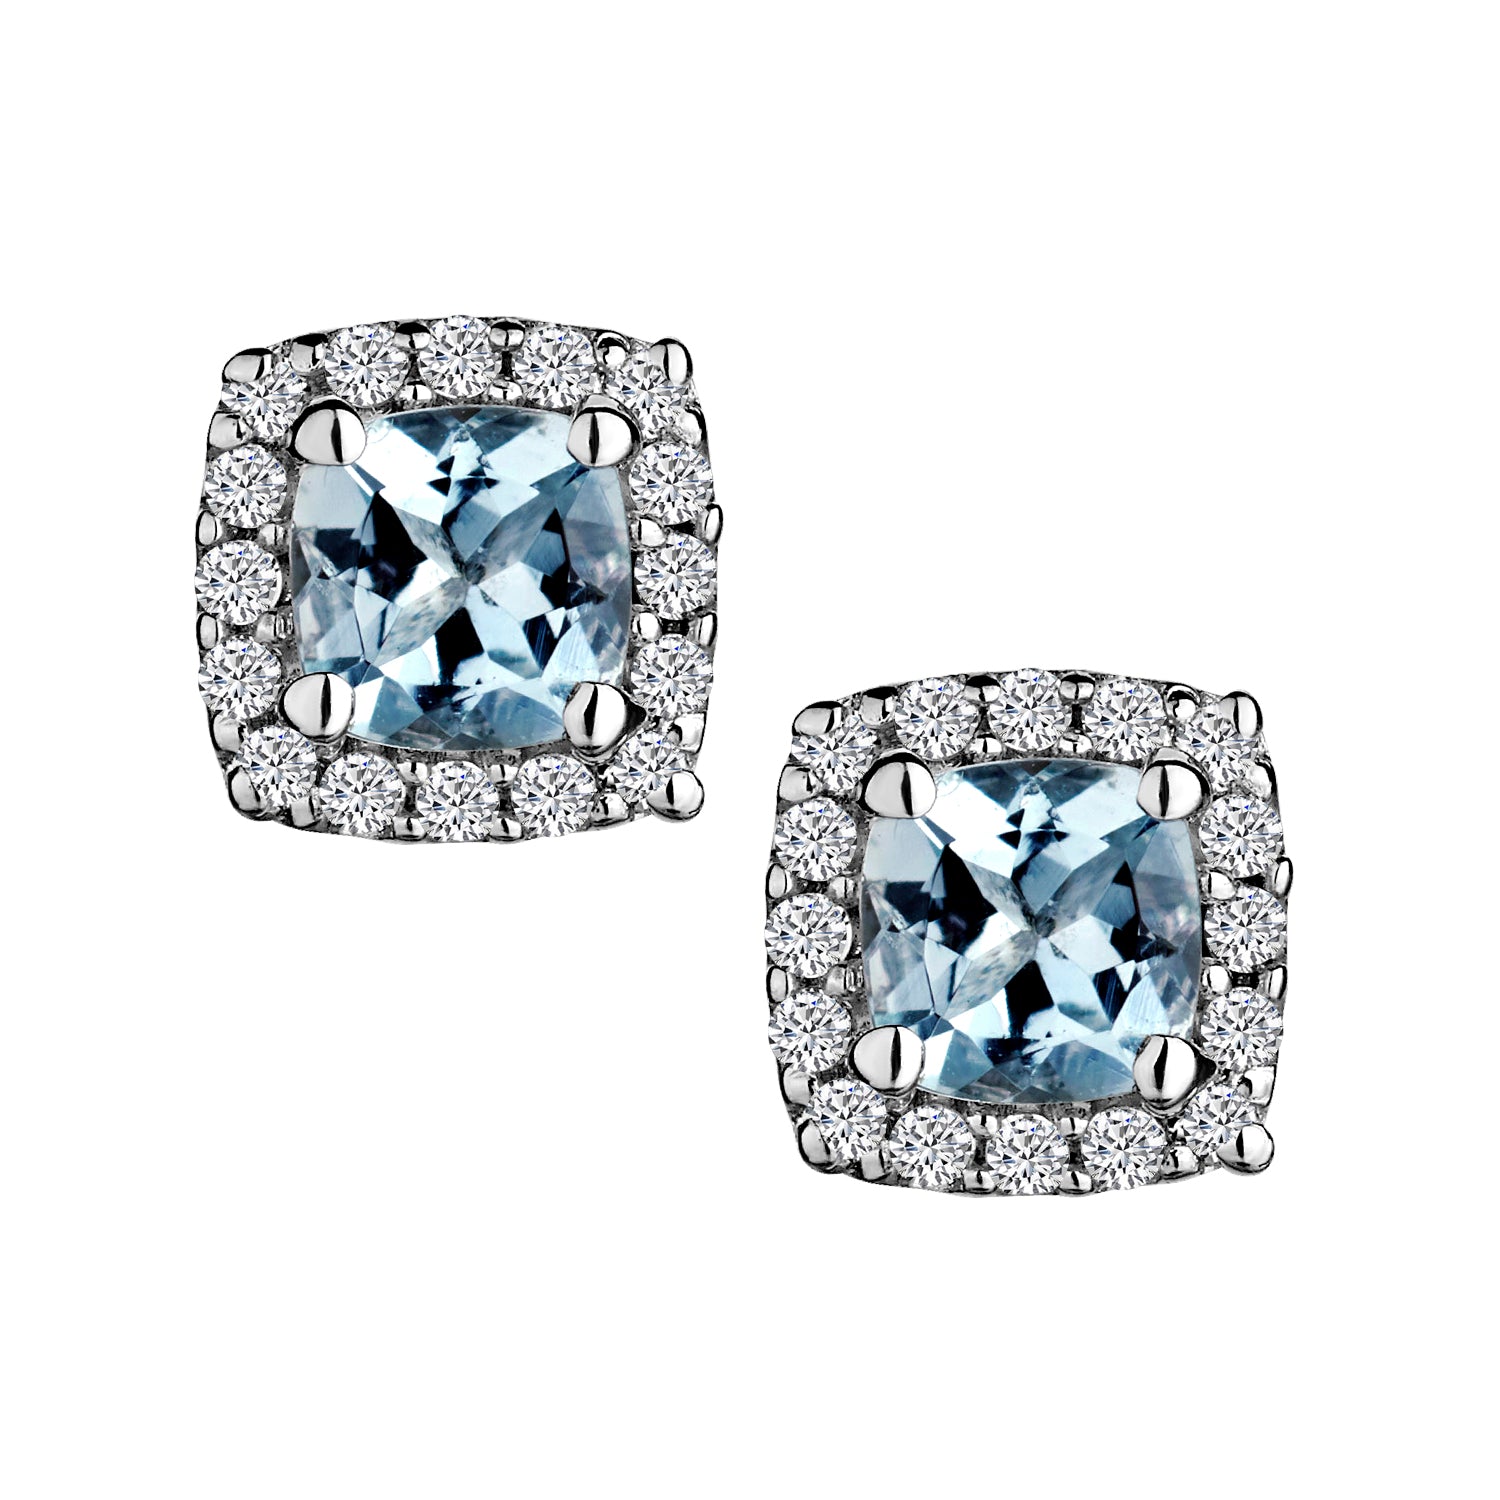 Genuine Aquamarine and White Sapphire Stud Earrings,  Sterling Silver.  Griffin Jewellery Designs